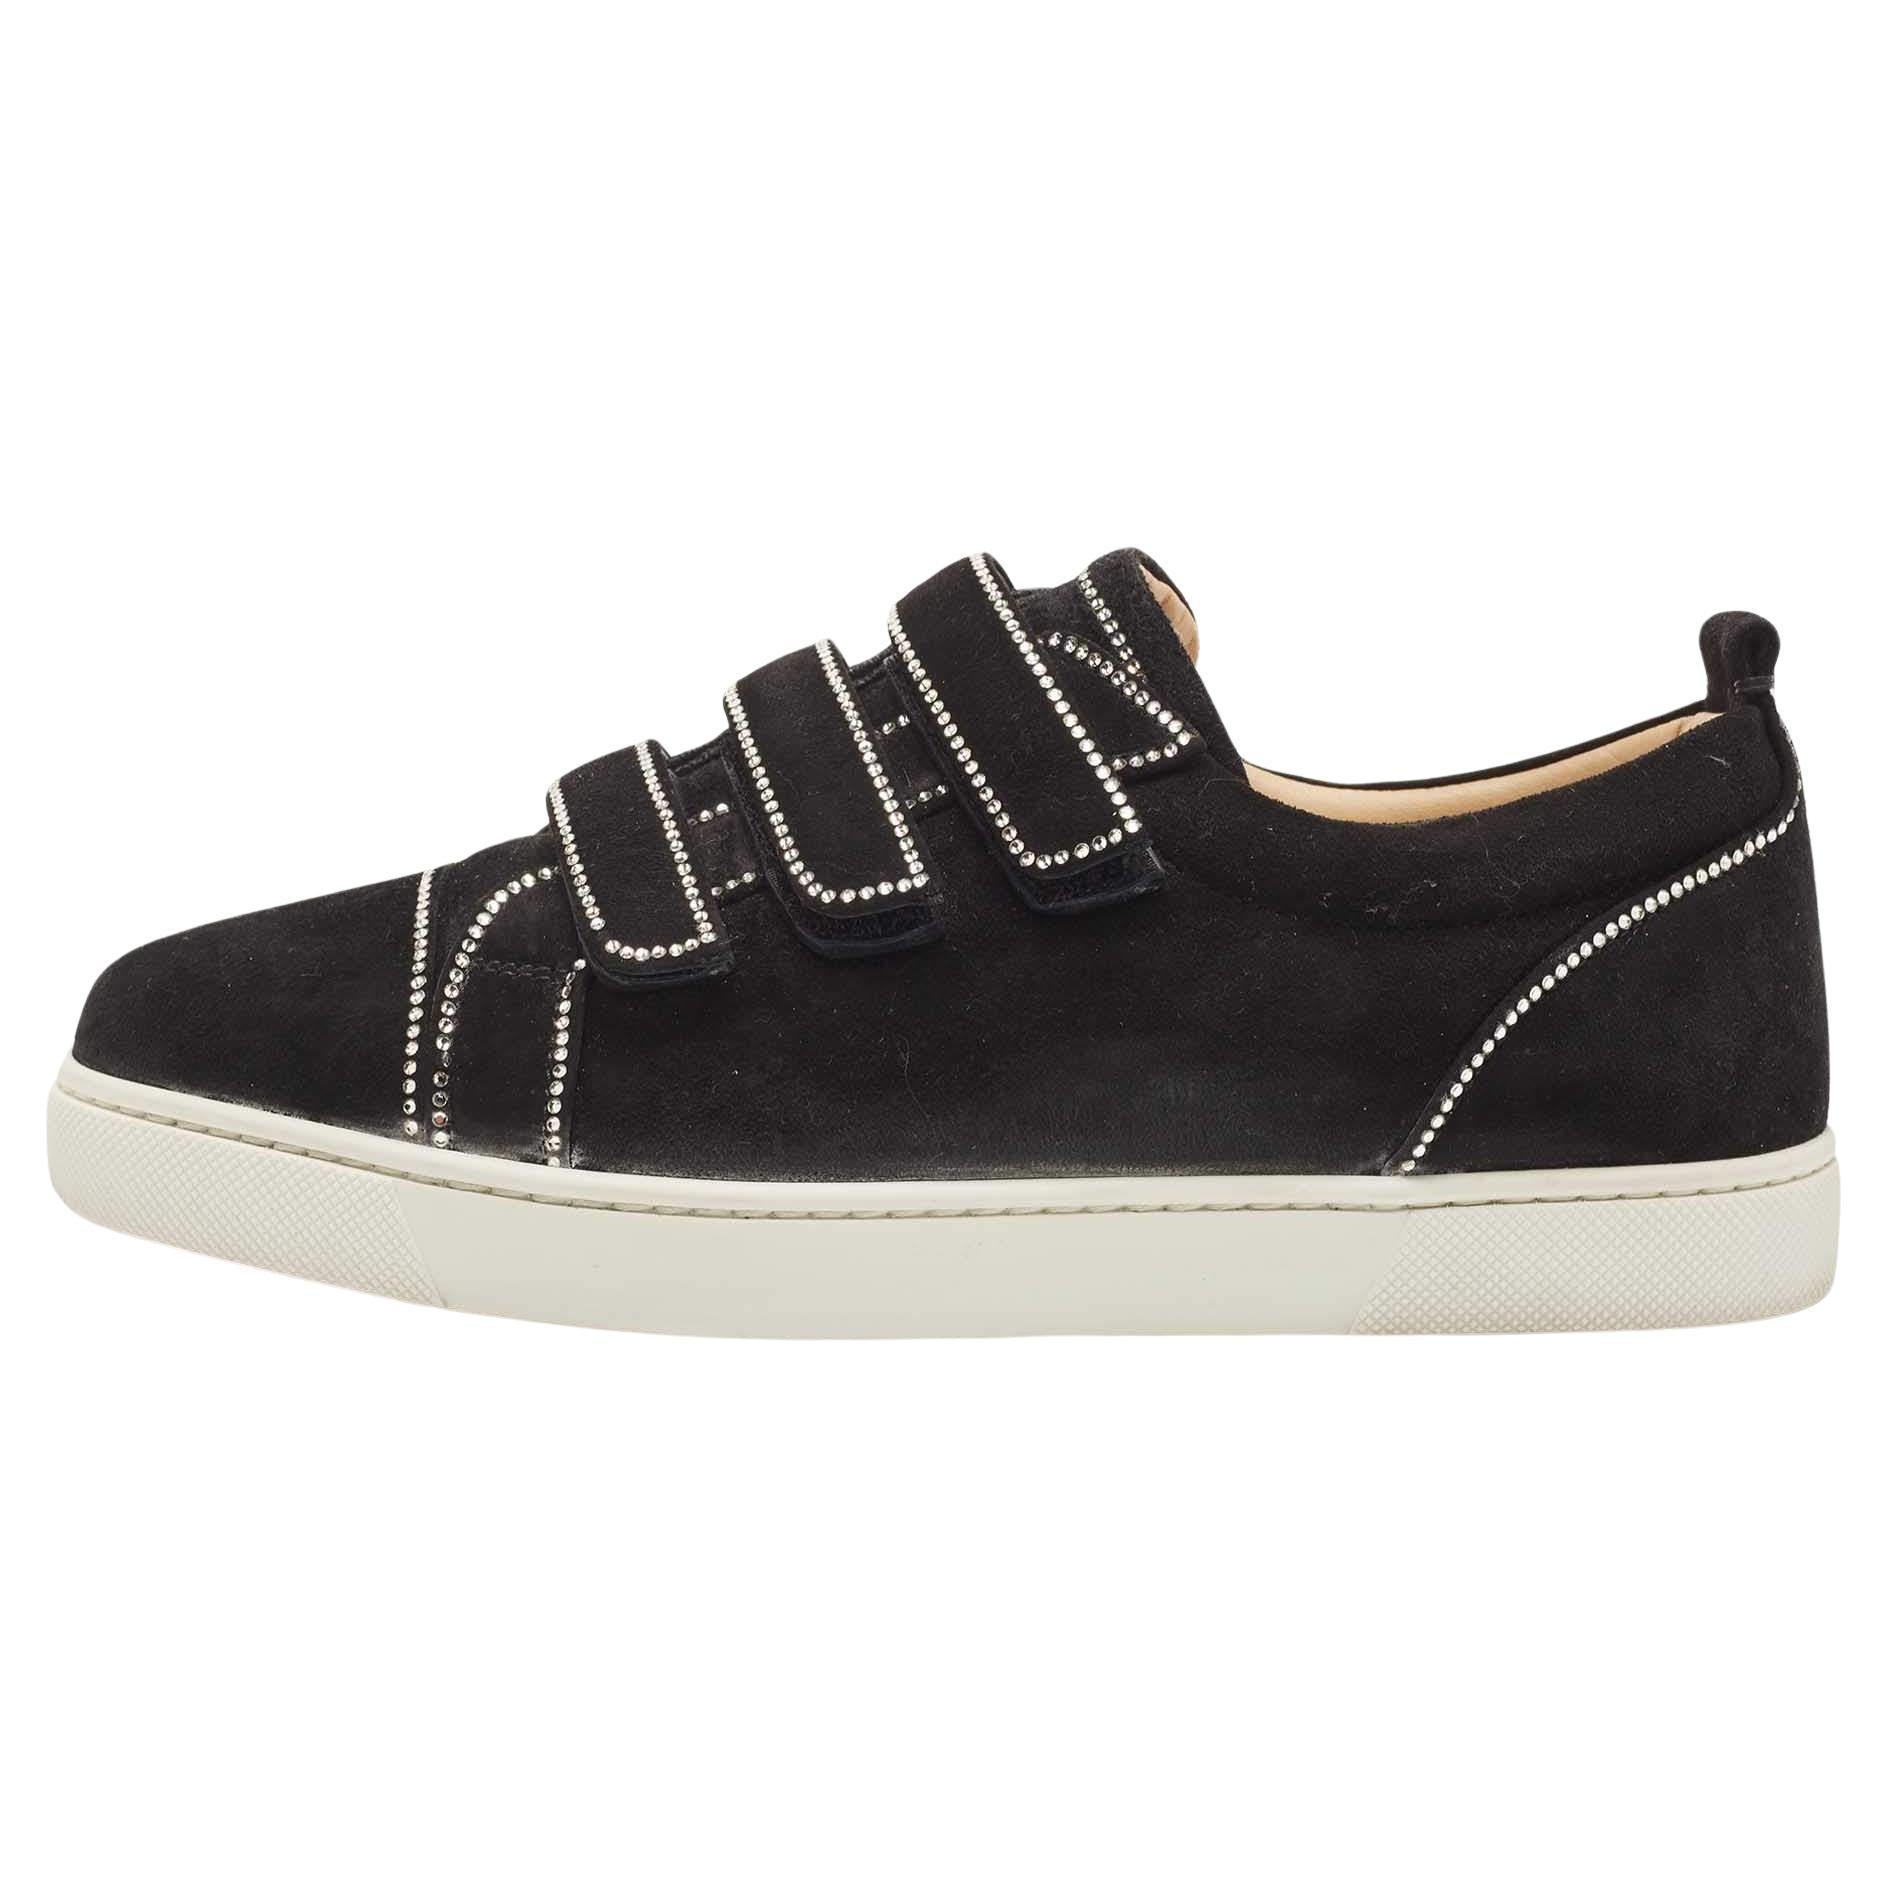 Christian Louboutin Black Suede Kiddo Bordo Embellished Velcro Low Top Sneakers  For Sale